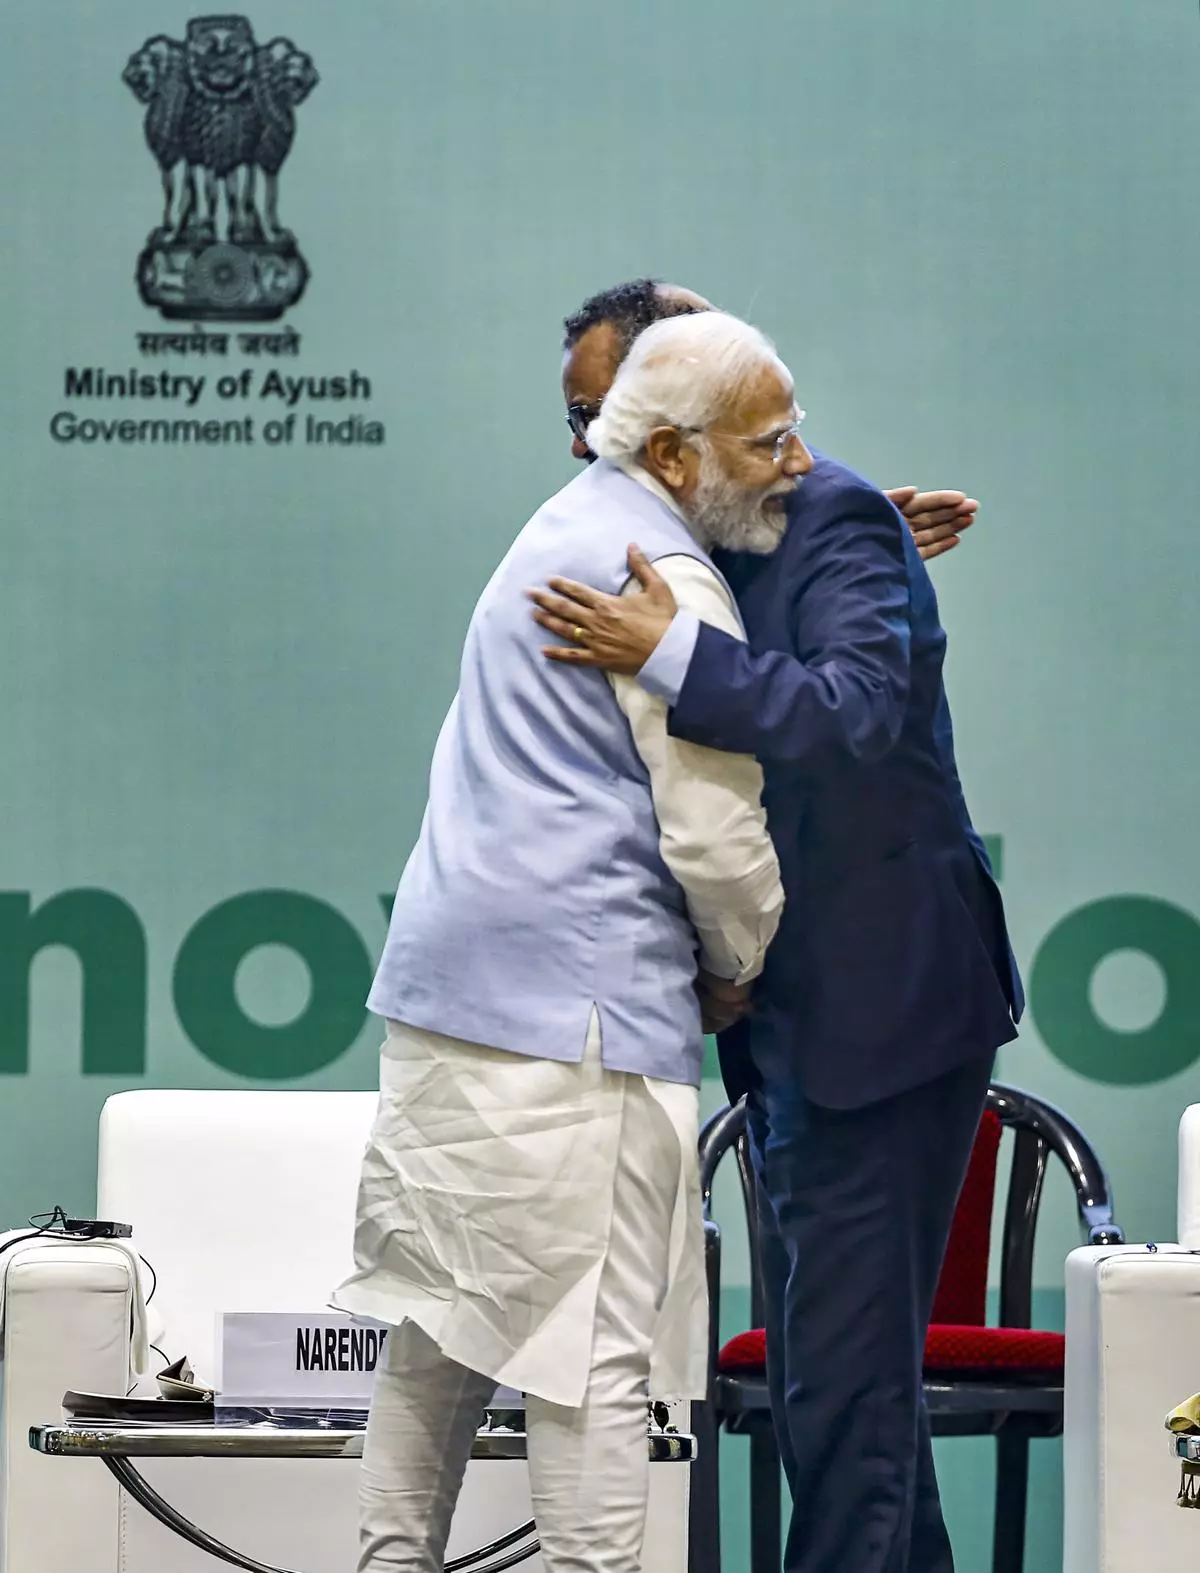 Prime Minister Narendra Modi and World Health Organization Director General Tedros Adhanom Ghebreyesus greet each other at the Global Ayush Investment and Innovation Summit 2022 (GAIIS) in Gandhinagar. -PTI Photo